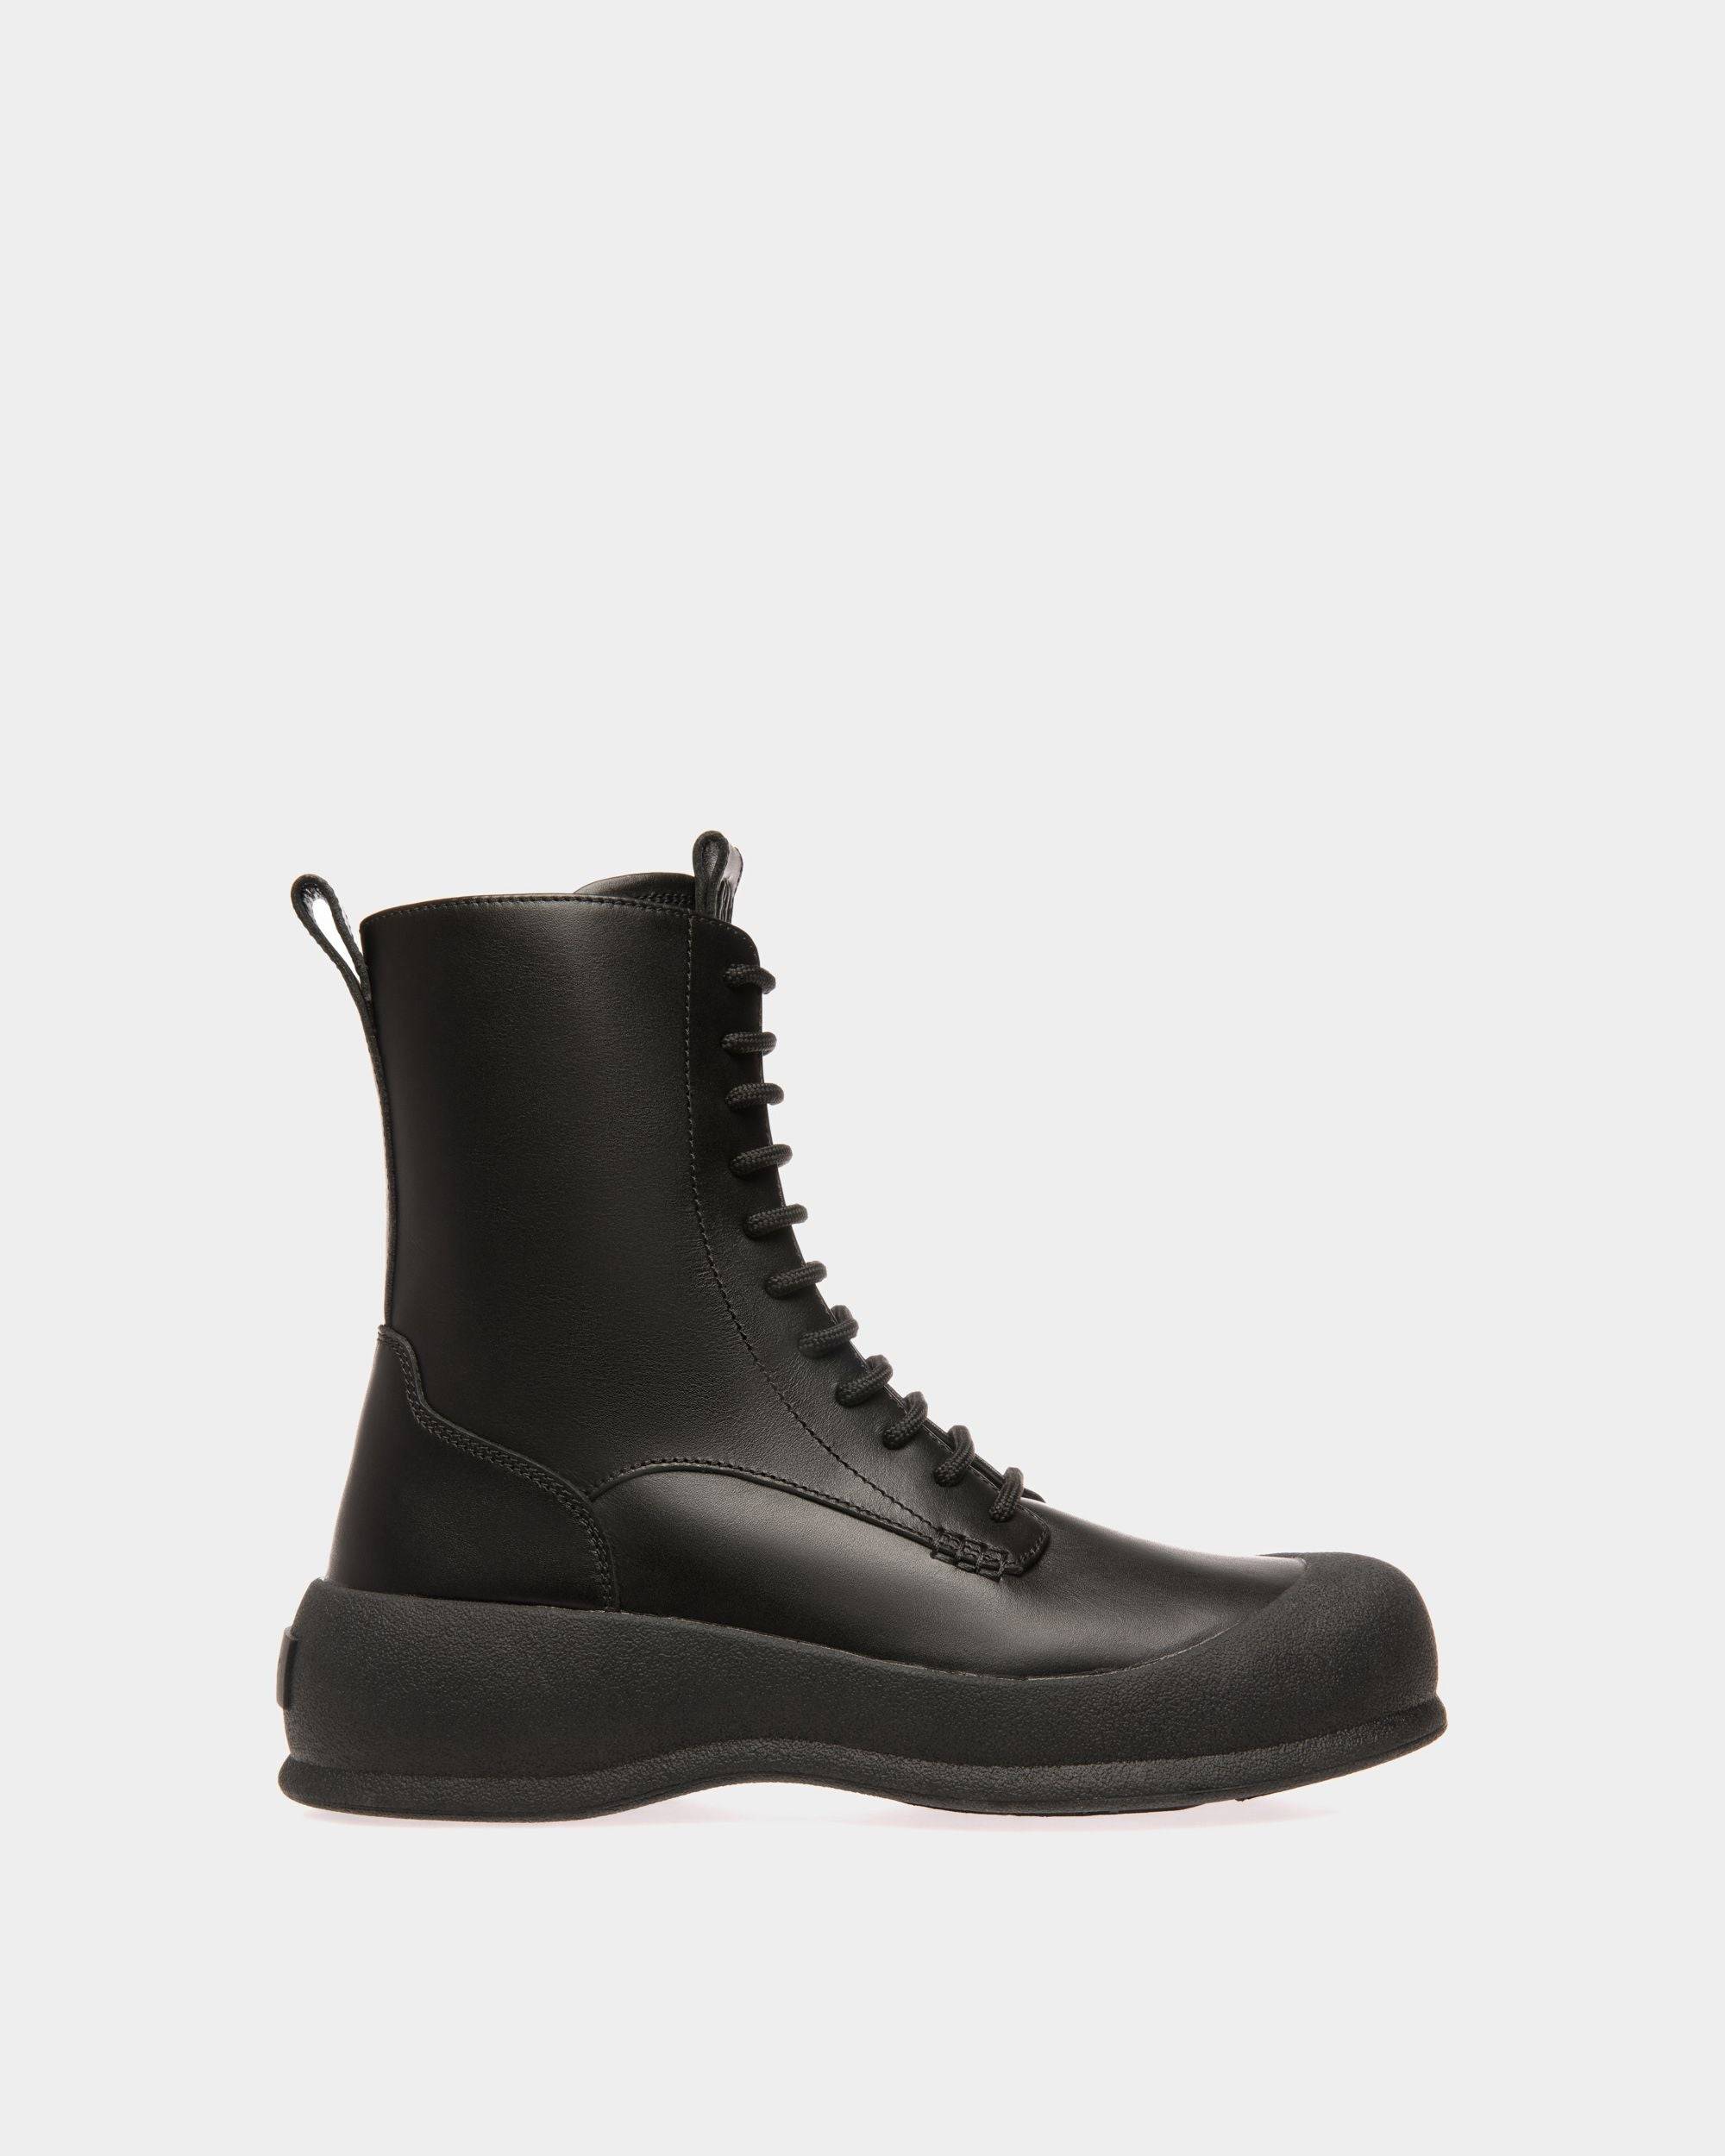 Women's Frei Boots In Black Leather | Bally | Still Life Side